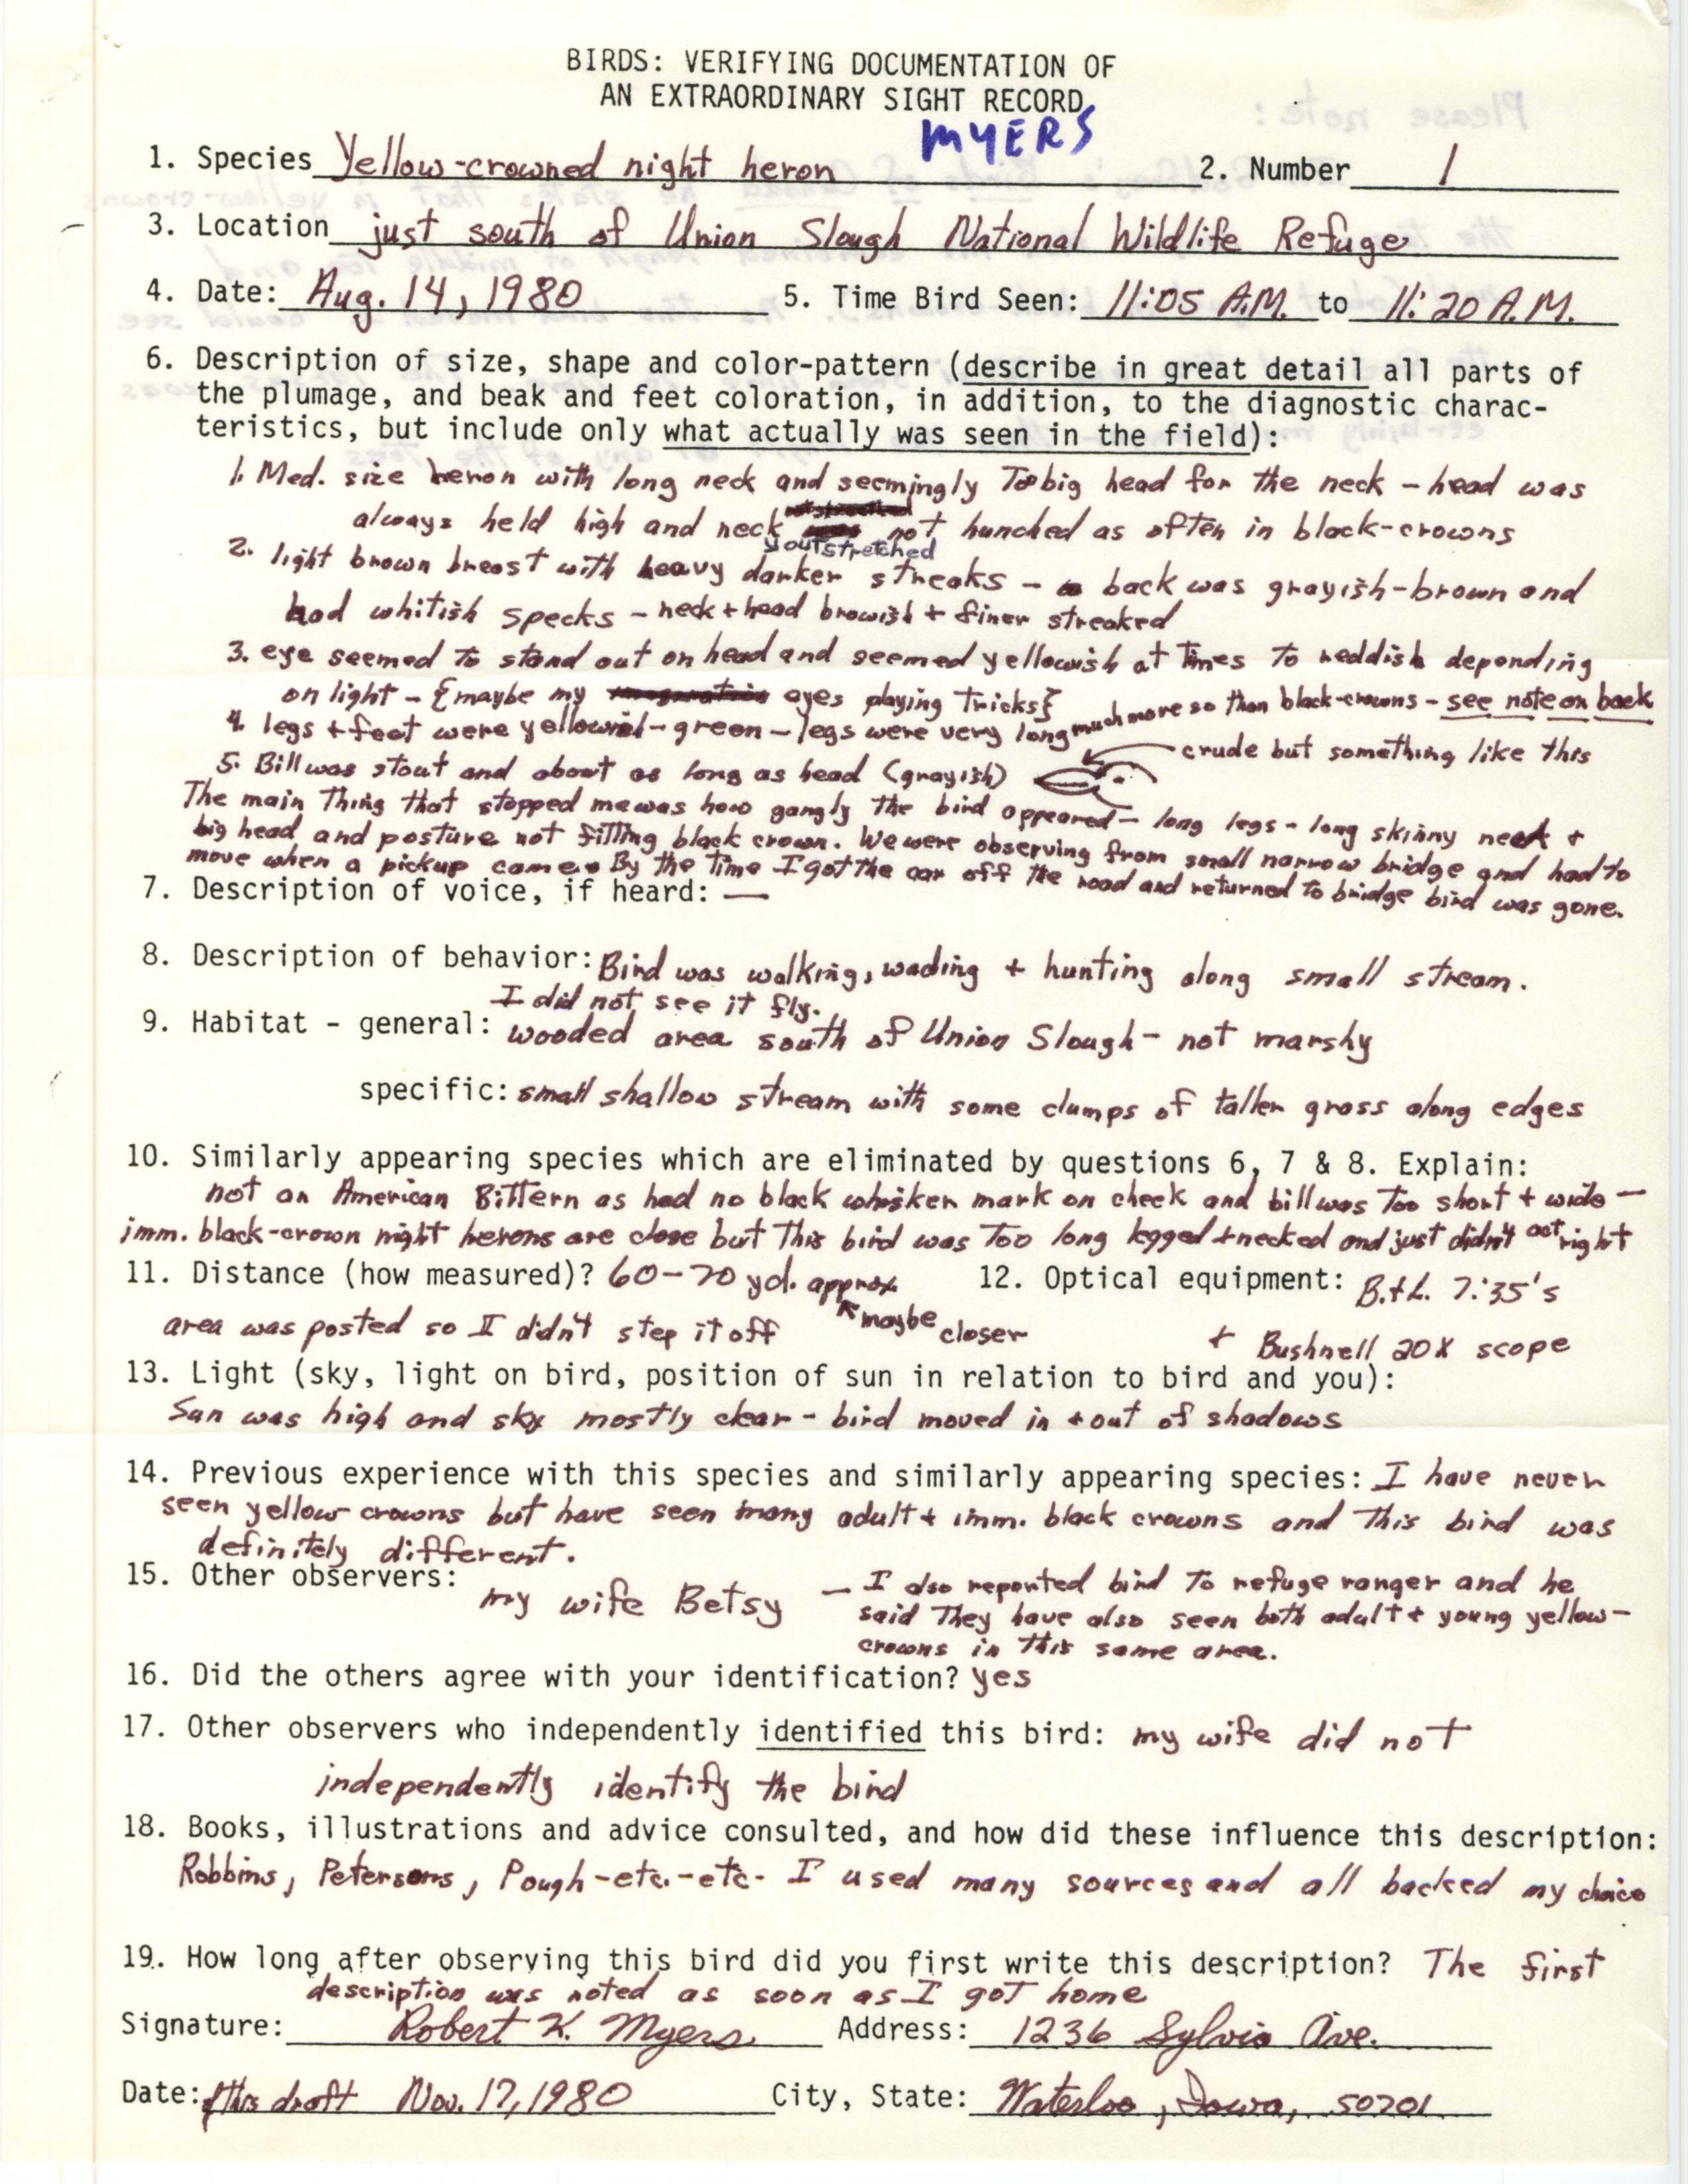 Rare bird documentation form for Yellow-crowned Night Heron at Union Slough National Wildlife Refuge, 1980